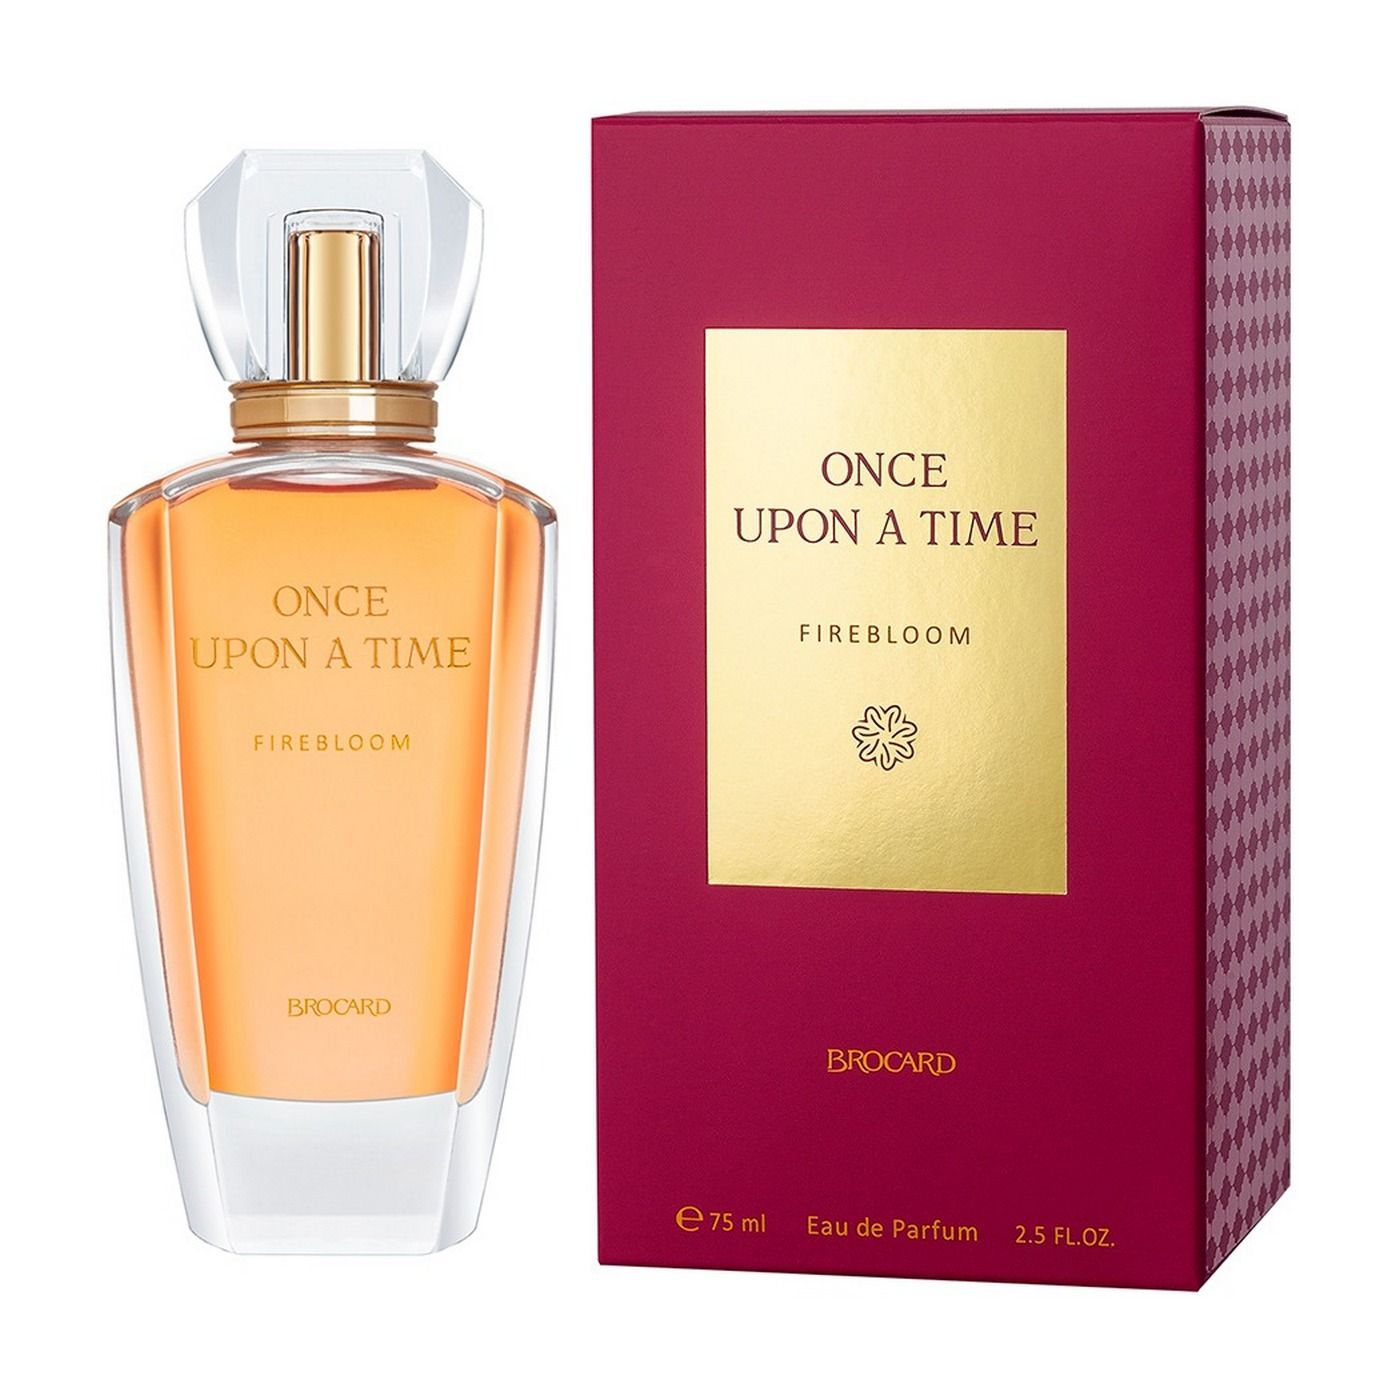 Once upon a time 1001 Jasmine Brocard. Духи от once Lorev. Firebloom. Blue boy - once upon a time. Once perfume